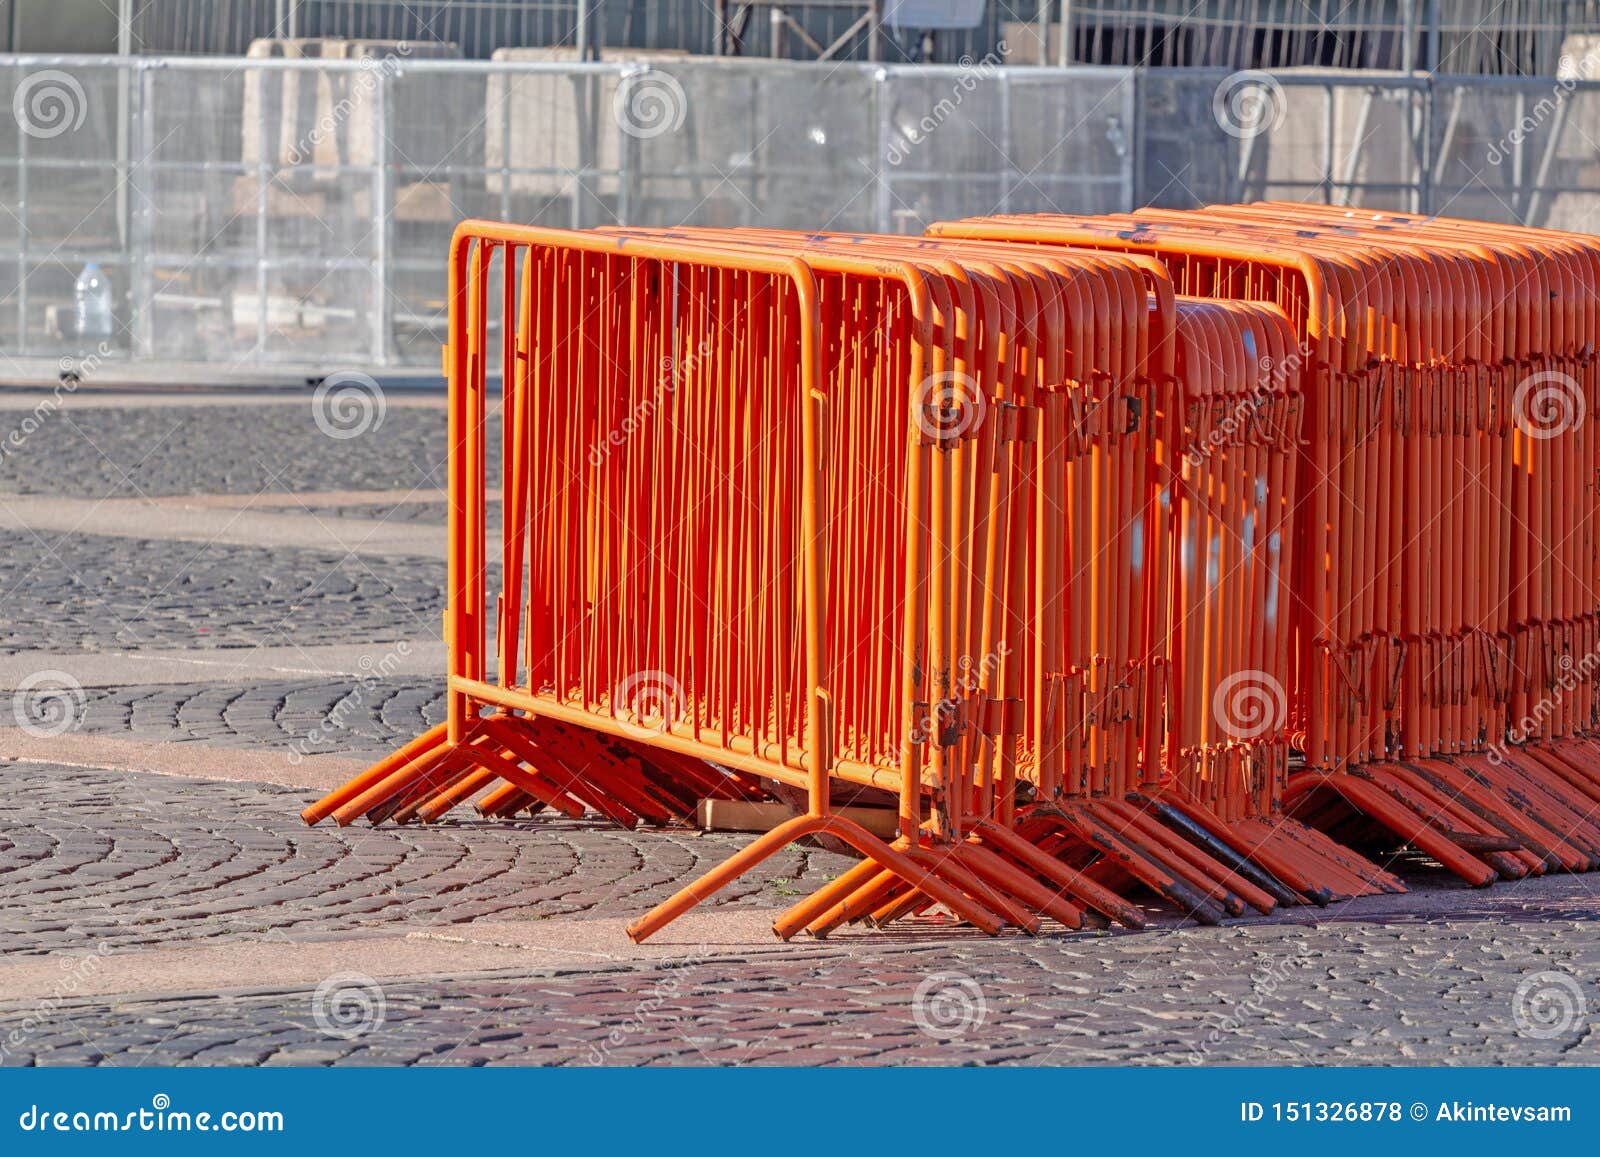 mobile steel fence. orange street barriers to restrict movement before the concert